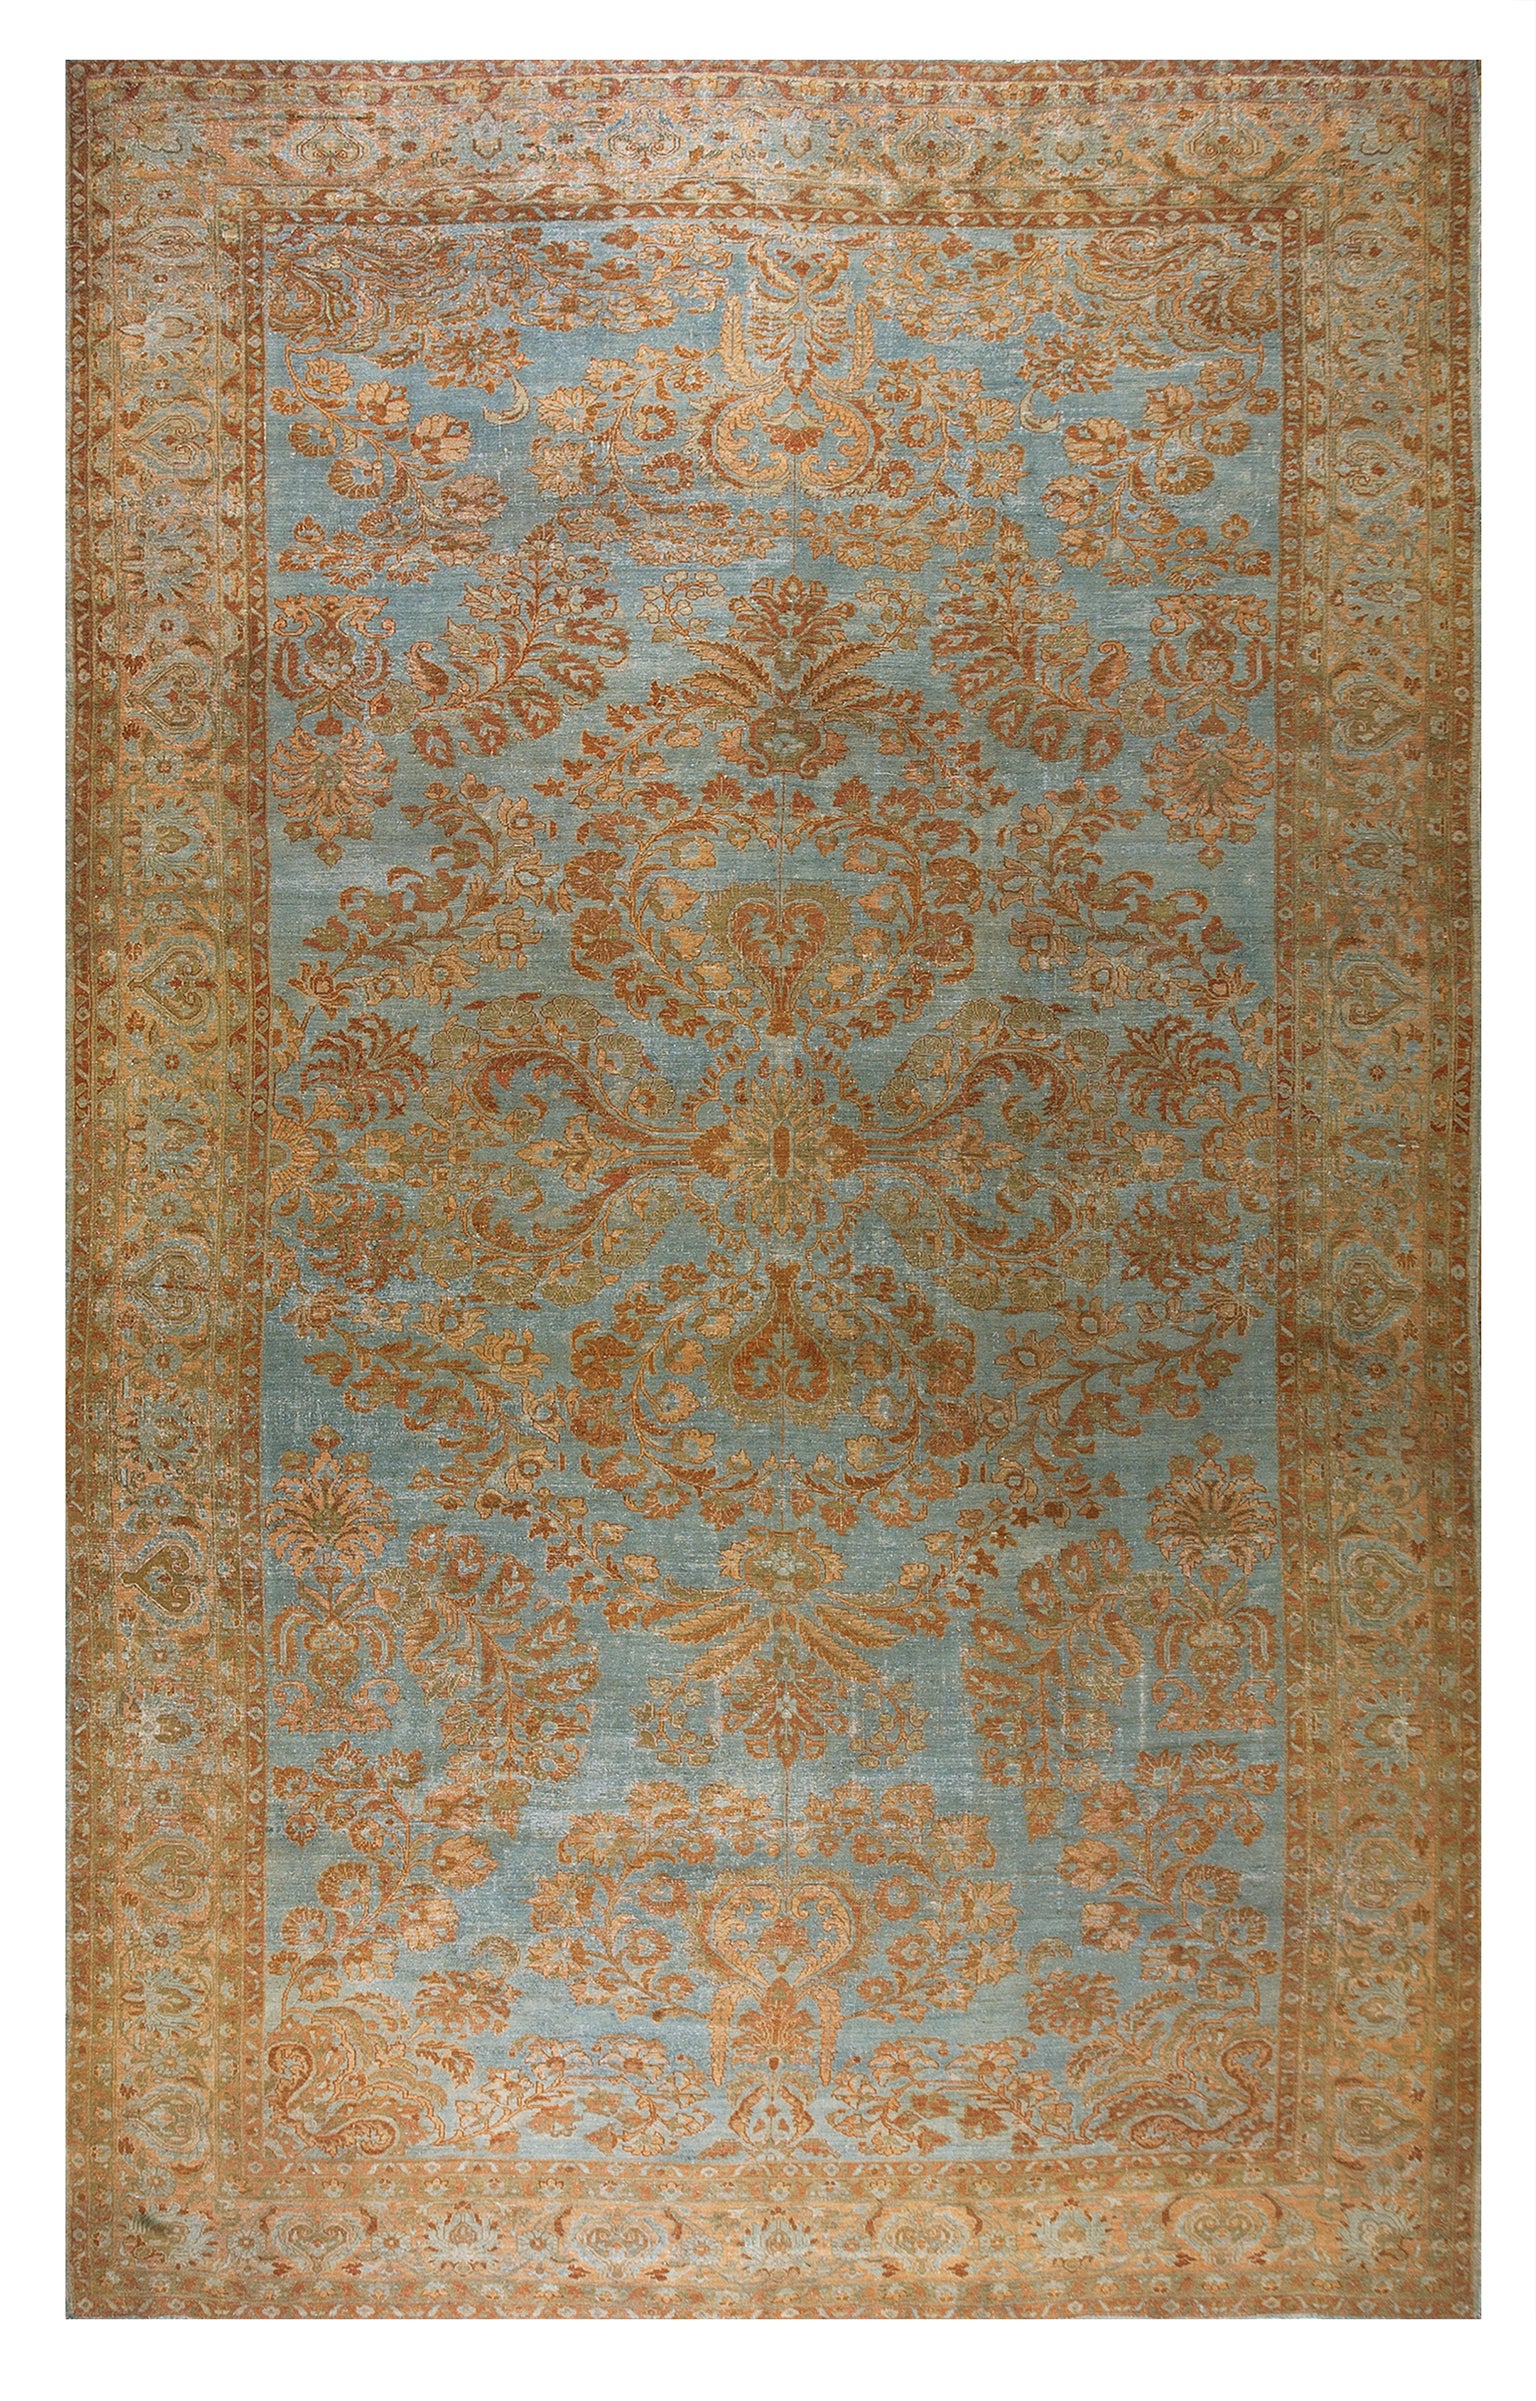 1920s Persian Malayer Carpet ( 10'6" x 16'9" - 320 x 510 ) For Sale